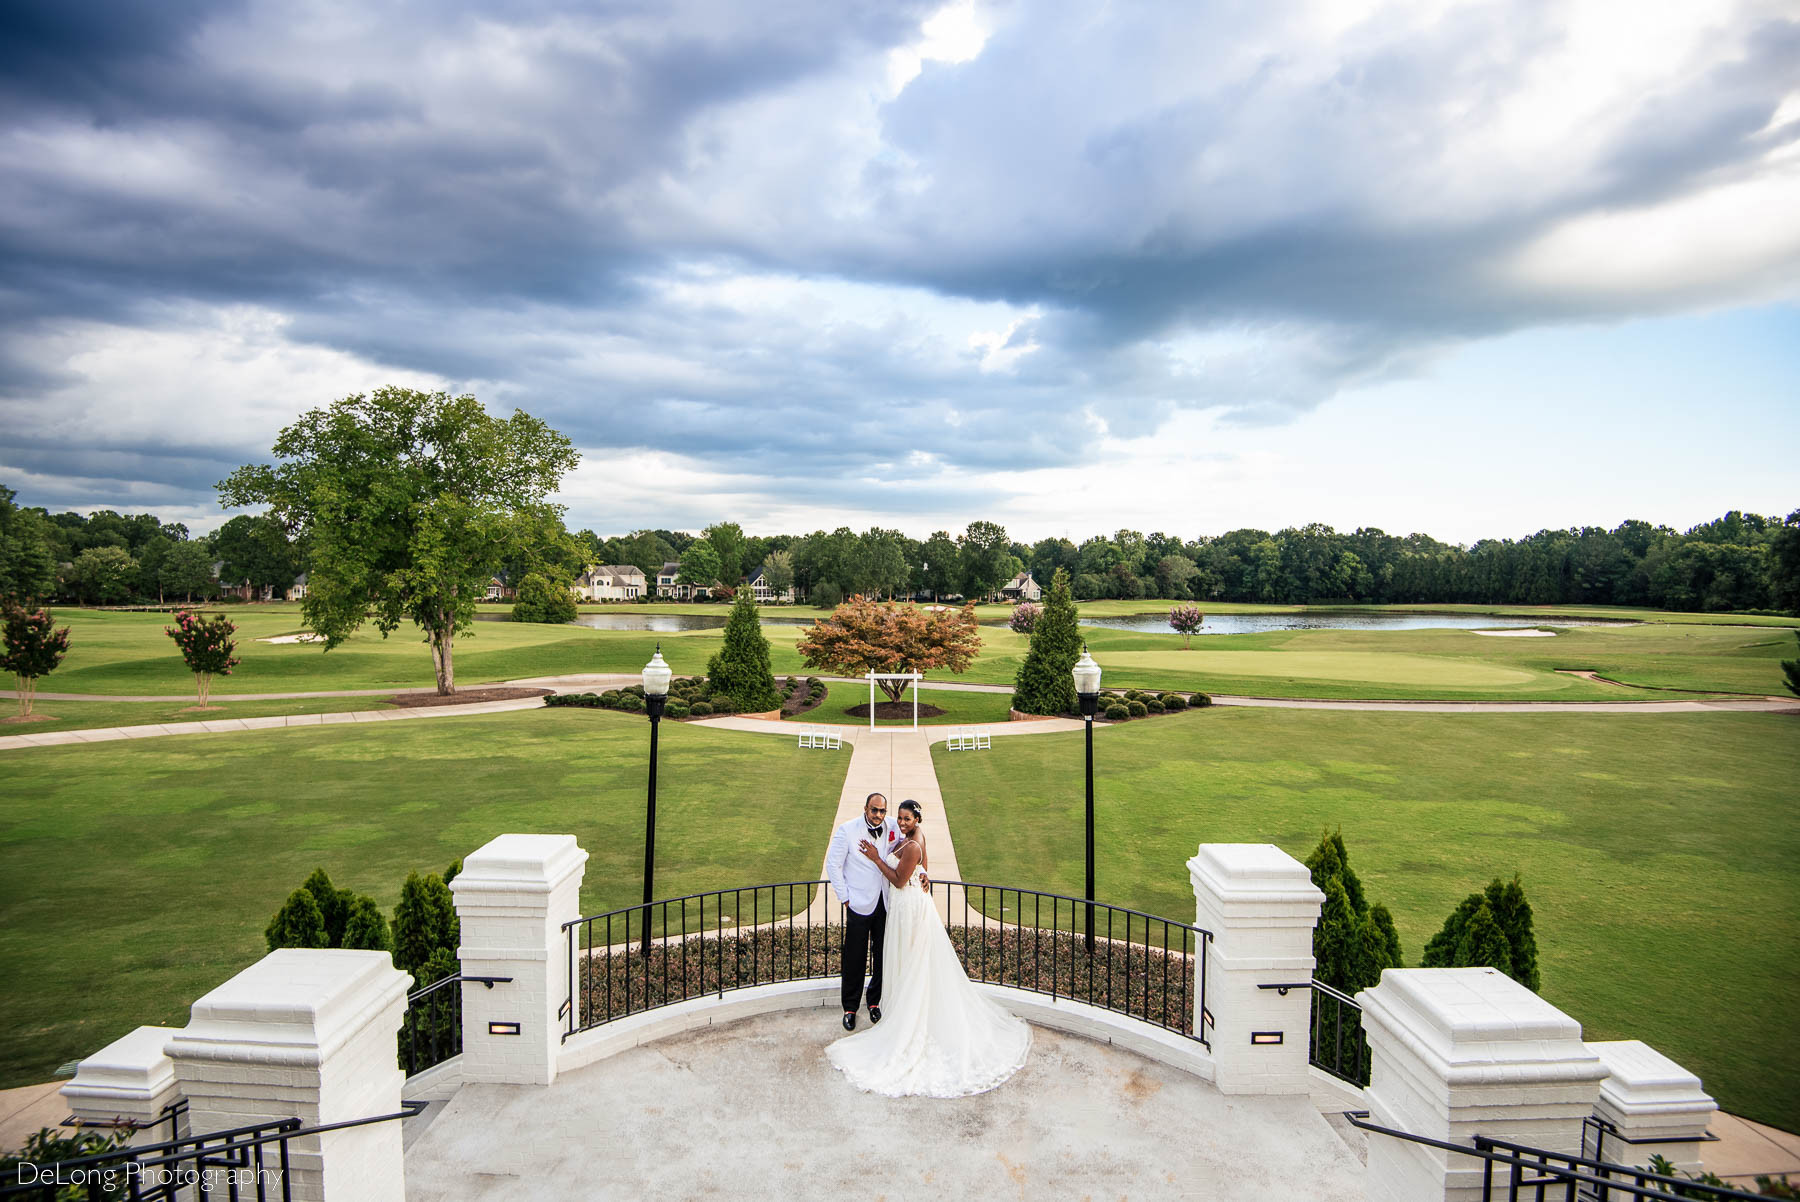 A wide and high perspective portrait of the bride and groom showcasing the beautiful scenery of the gold course at Providence Country Club by Charlotte wedding photographers DeLong Photography